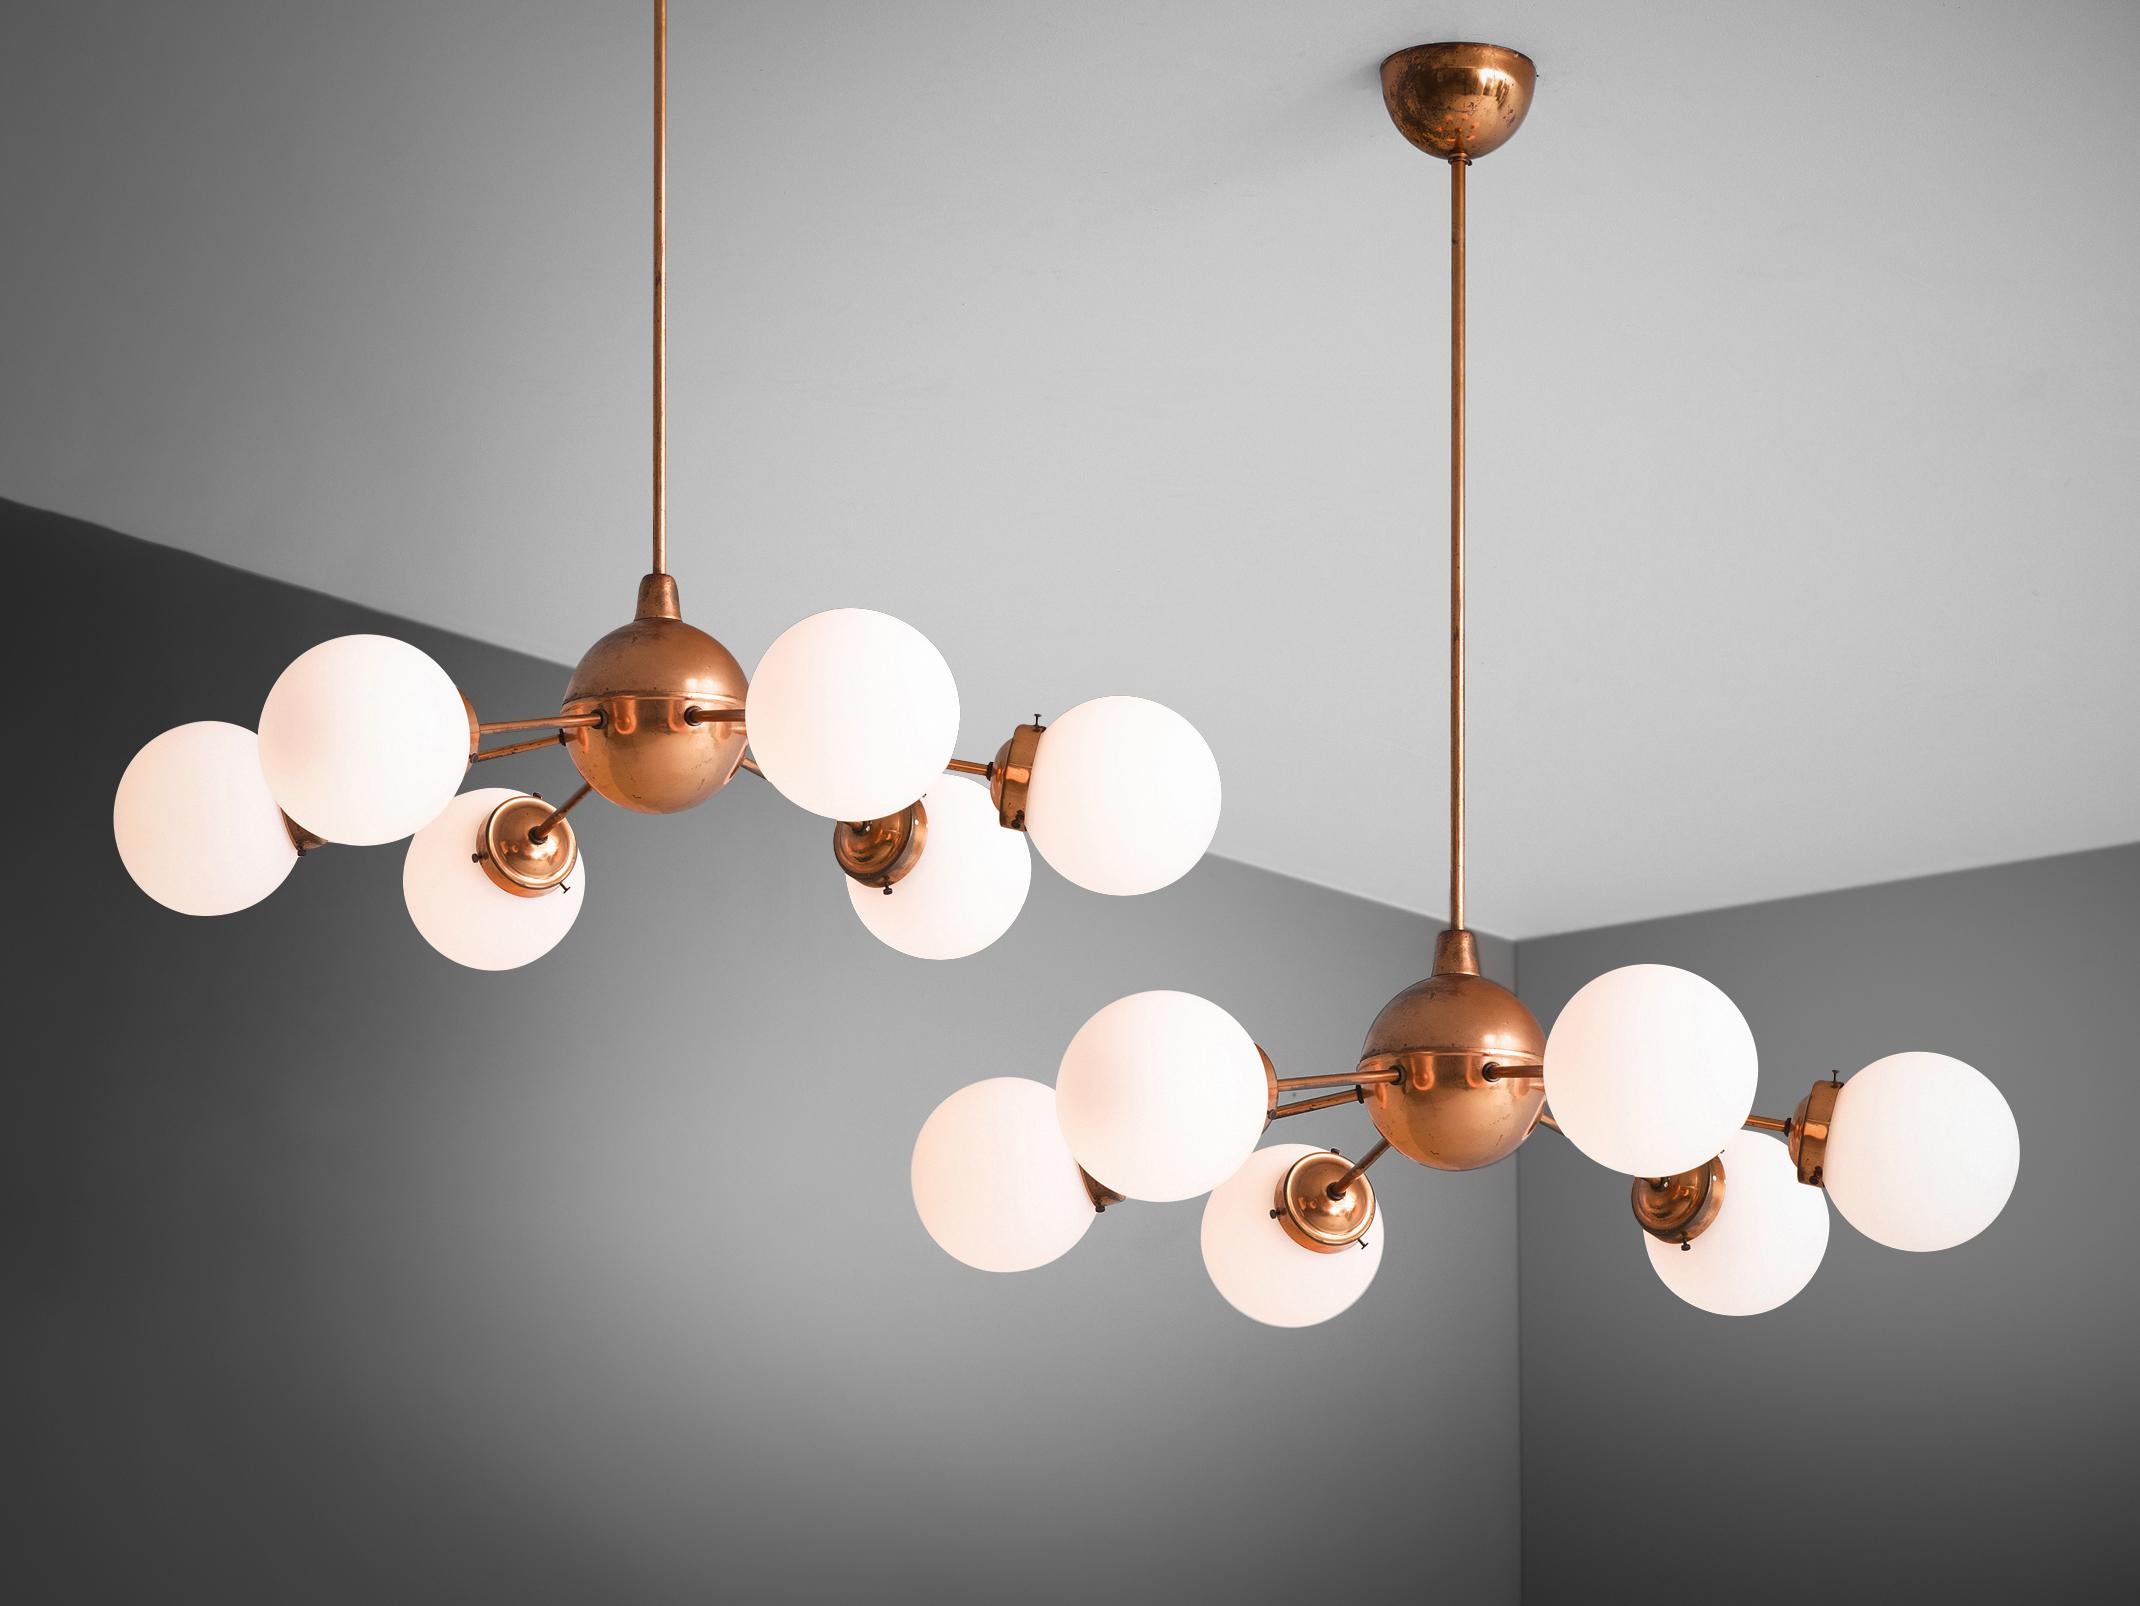 Sputnik chandeliers, opal glass, copper, Europe, 1970s

Beautiful chandeliers with a bright copper body and opal glass shades. These sputnik chandeliers feature six arms each with a opal glass sphere. The stern and canopy are executed in matching